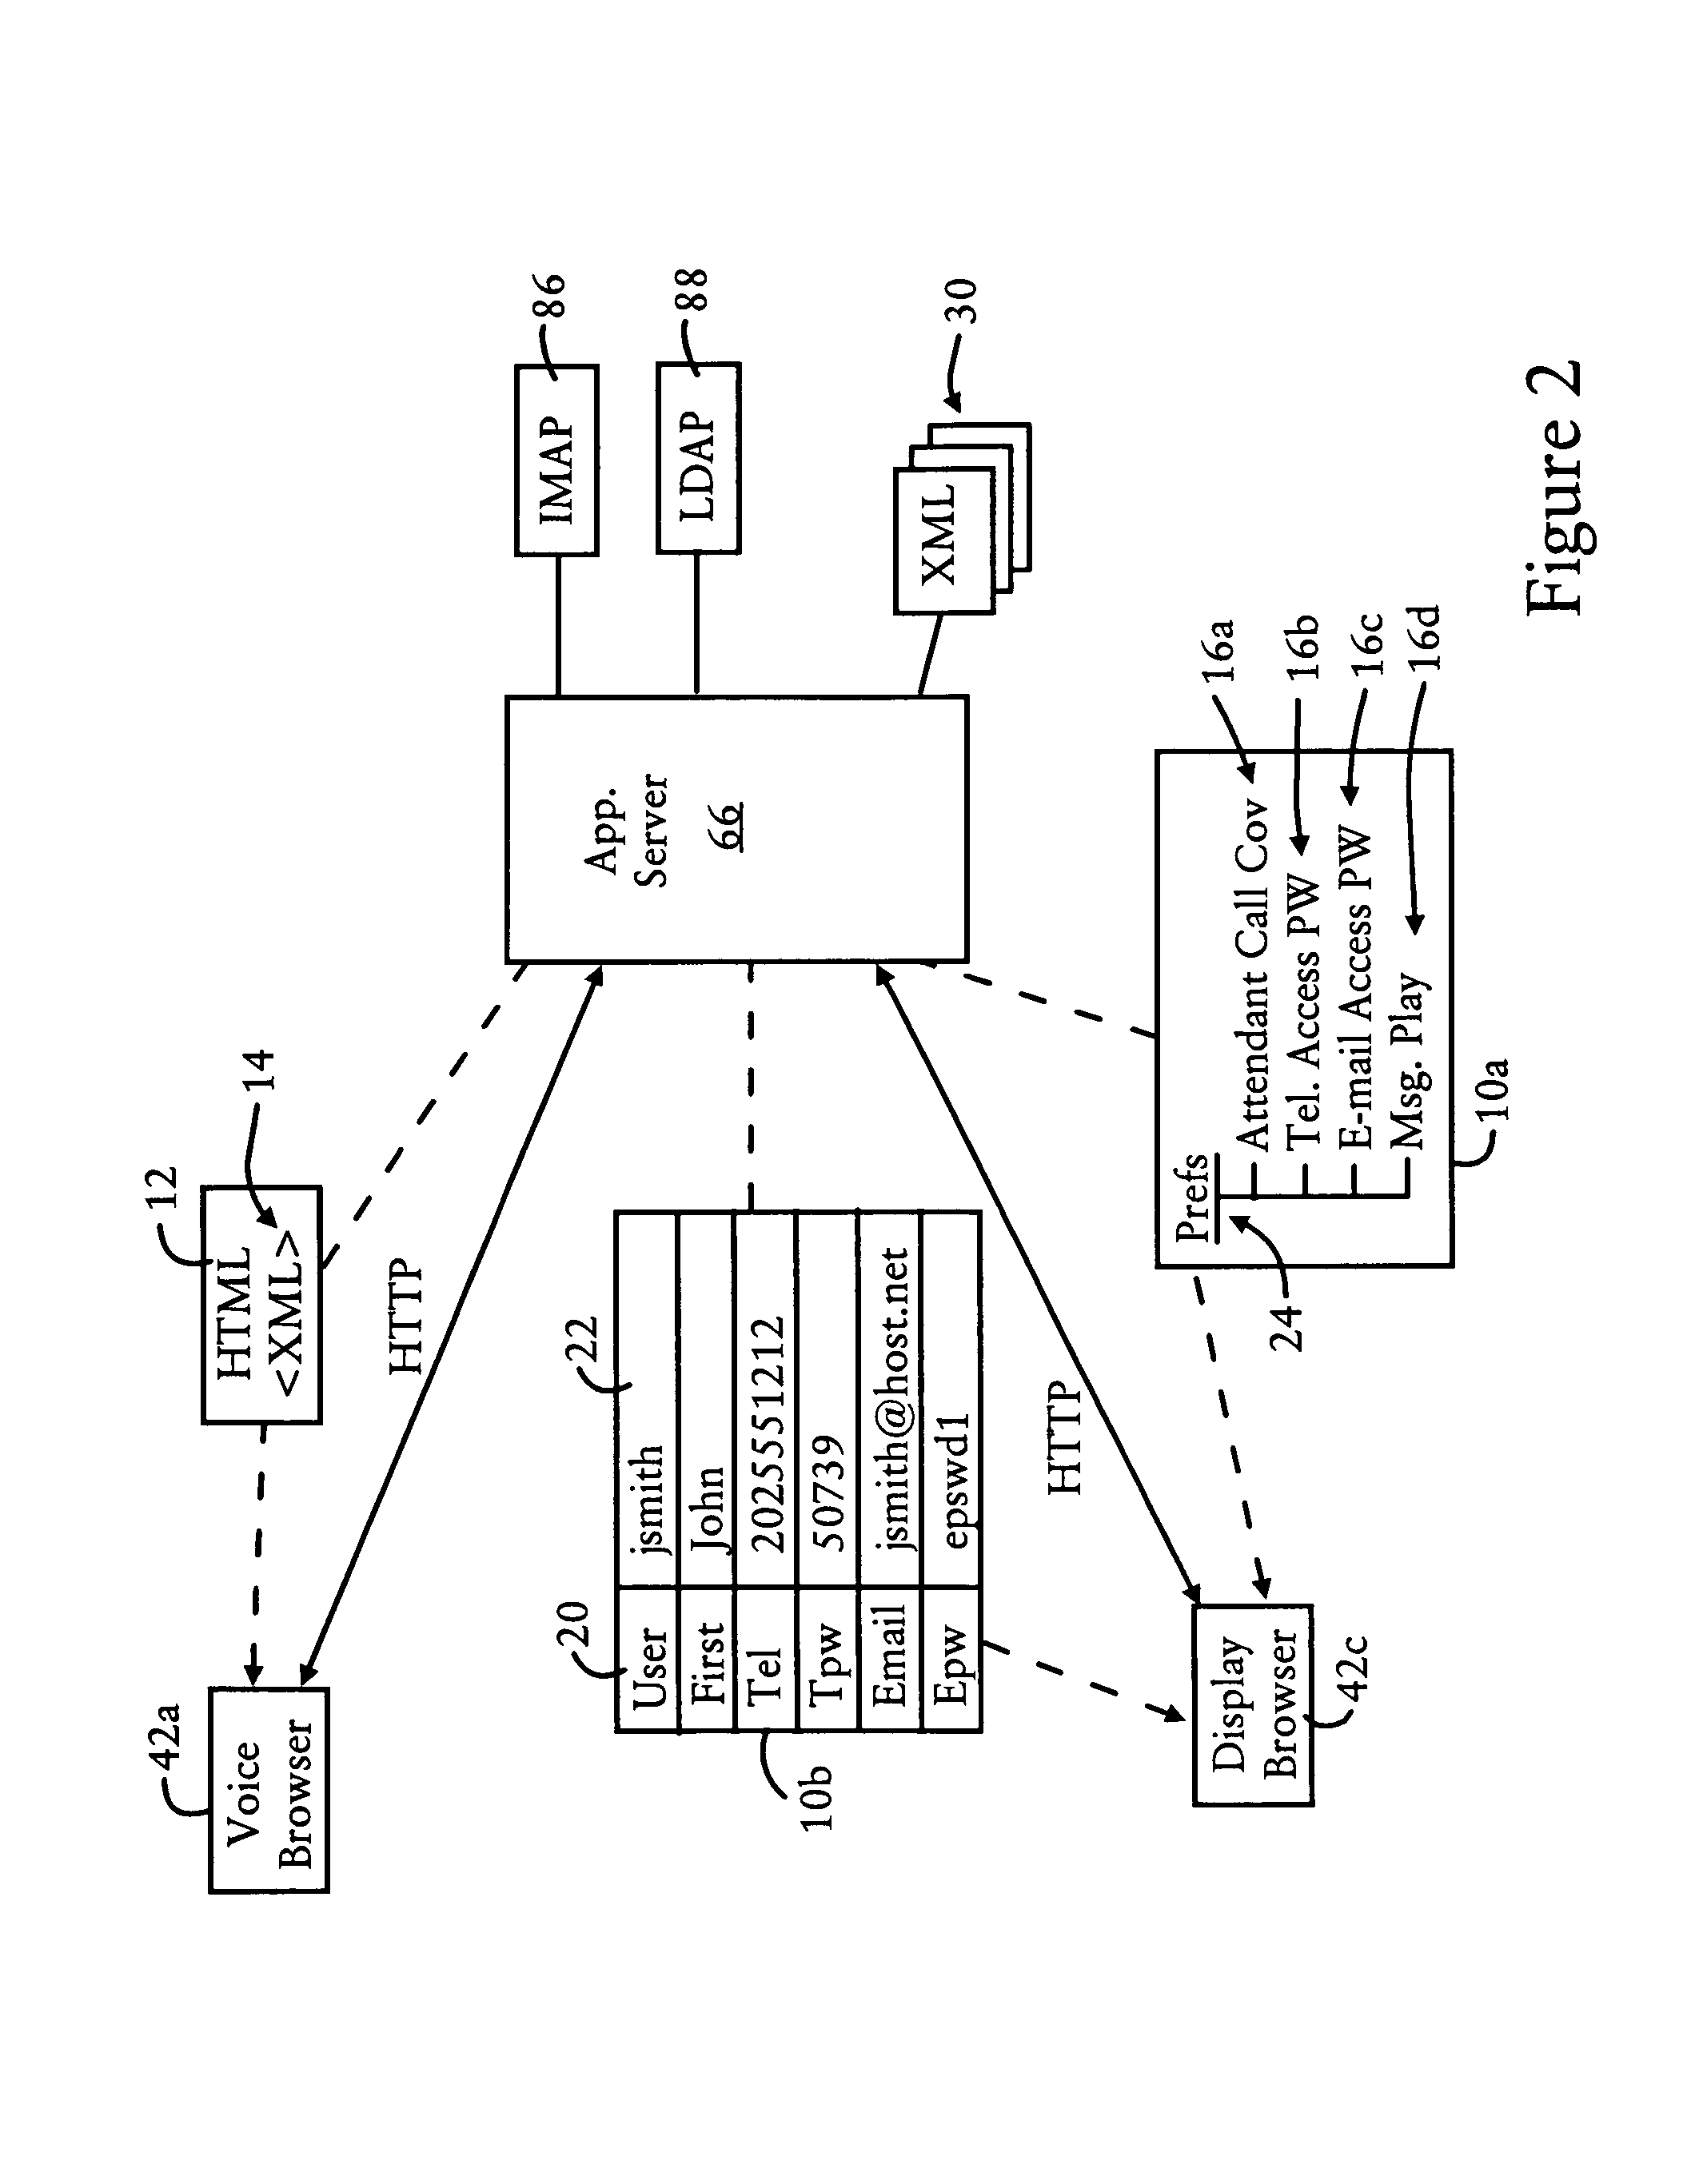 Application server configured for dynamically generating web forms based on extensible markup language documents and retrieved subscriber data